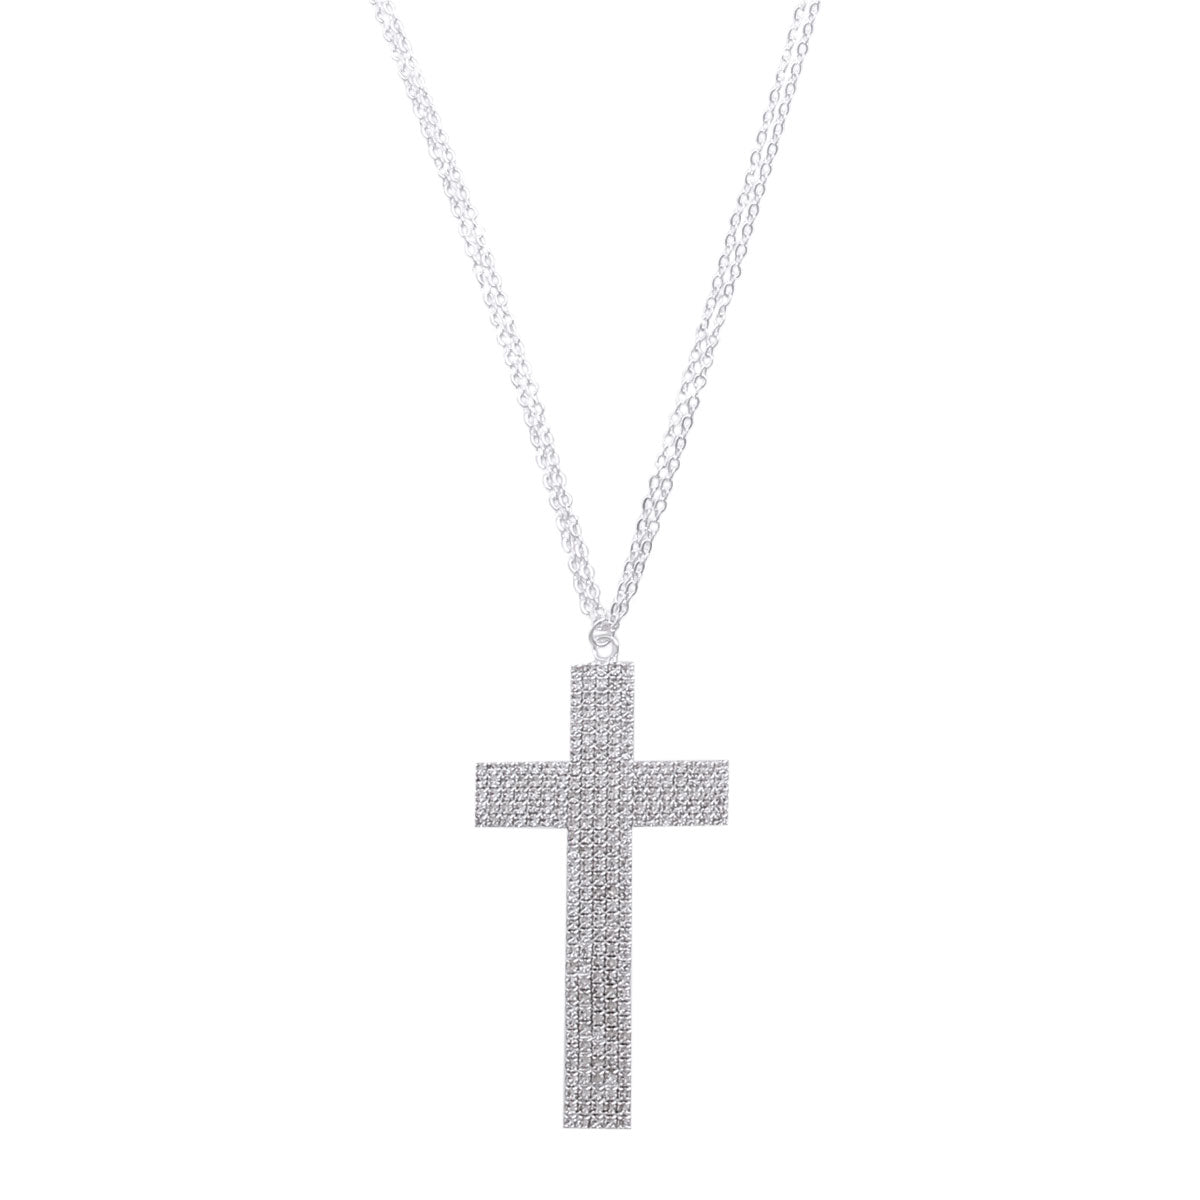 Silver Pave Cross Double Chain Necklace